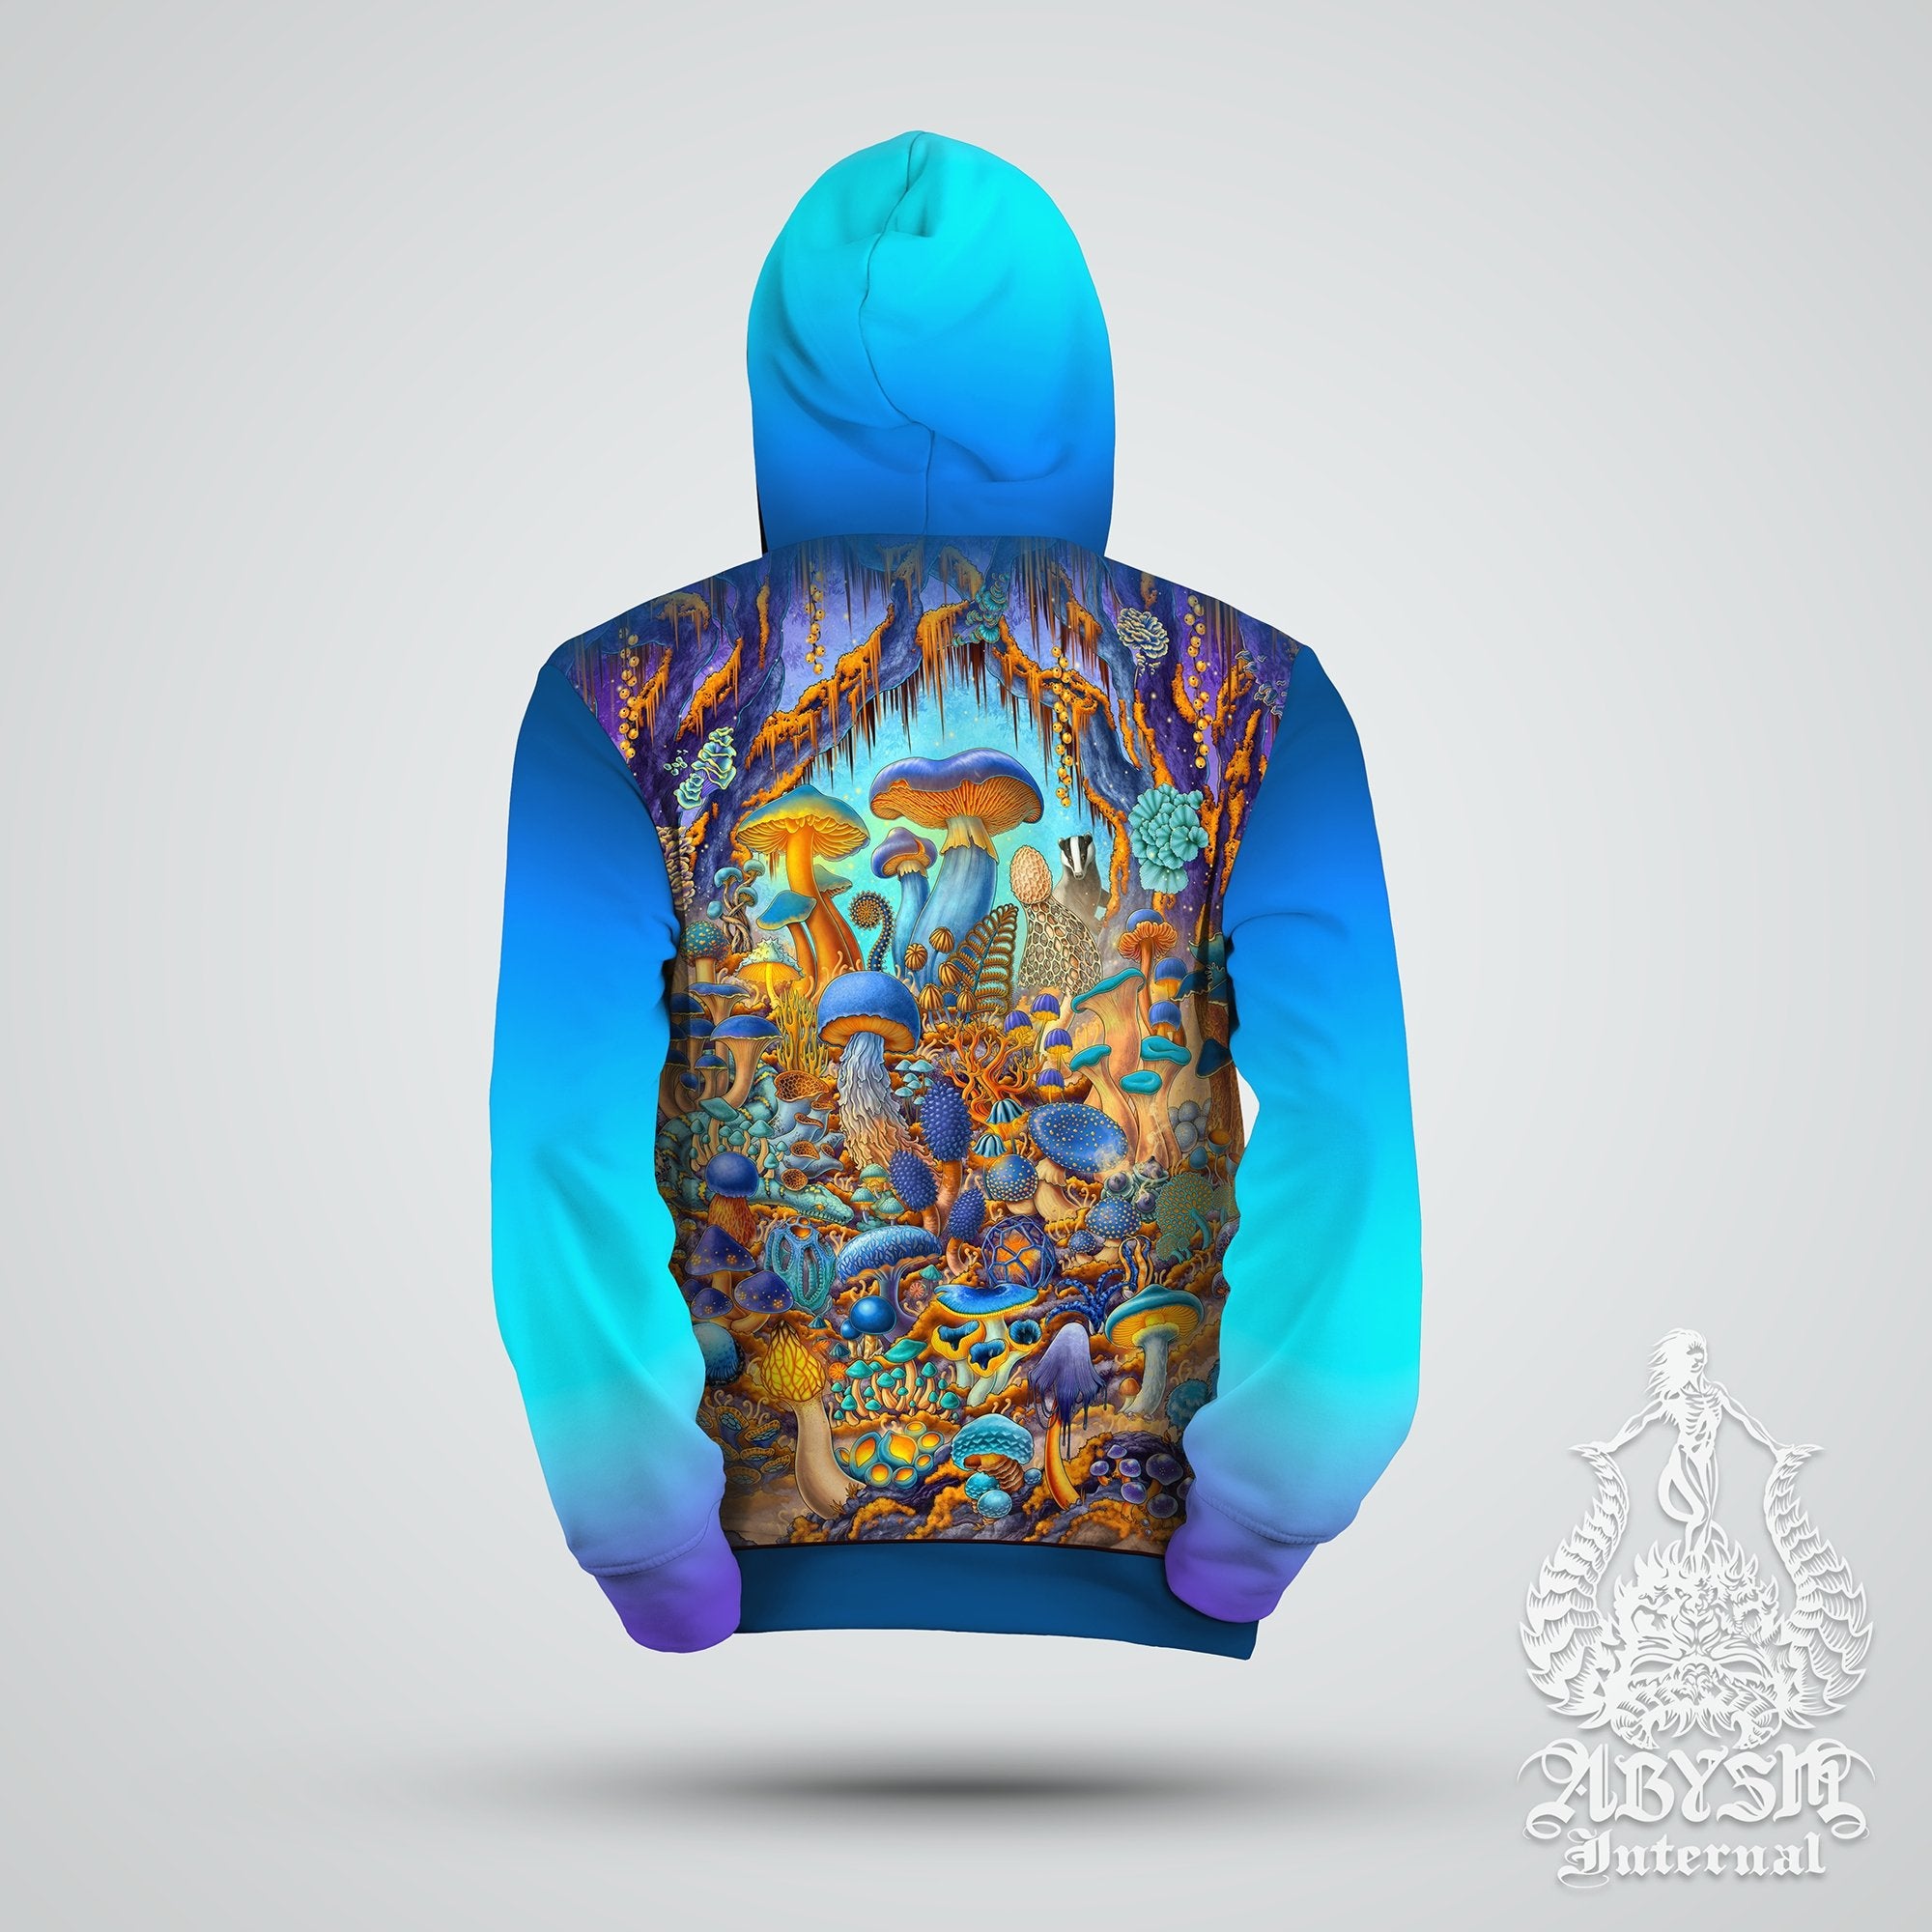 Mushrooms Hoodie, Trippy Outfit, Psychedelic Magic Shrooms, Indie Festival Streetwear, Alternative Clothing, Unisex, Mycologist Gift - Cyan Gold - Abysm Internal